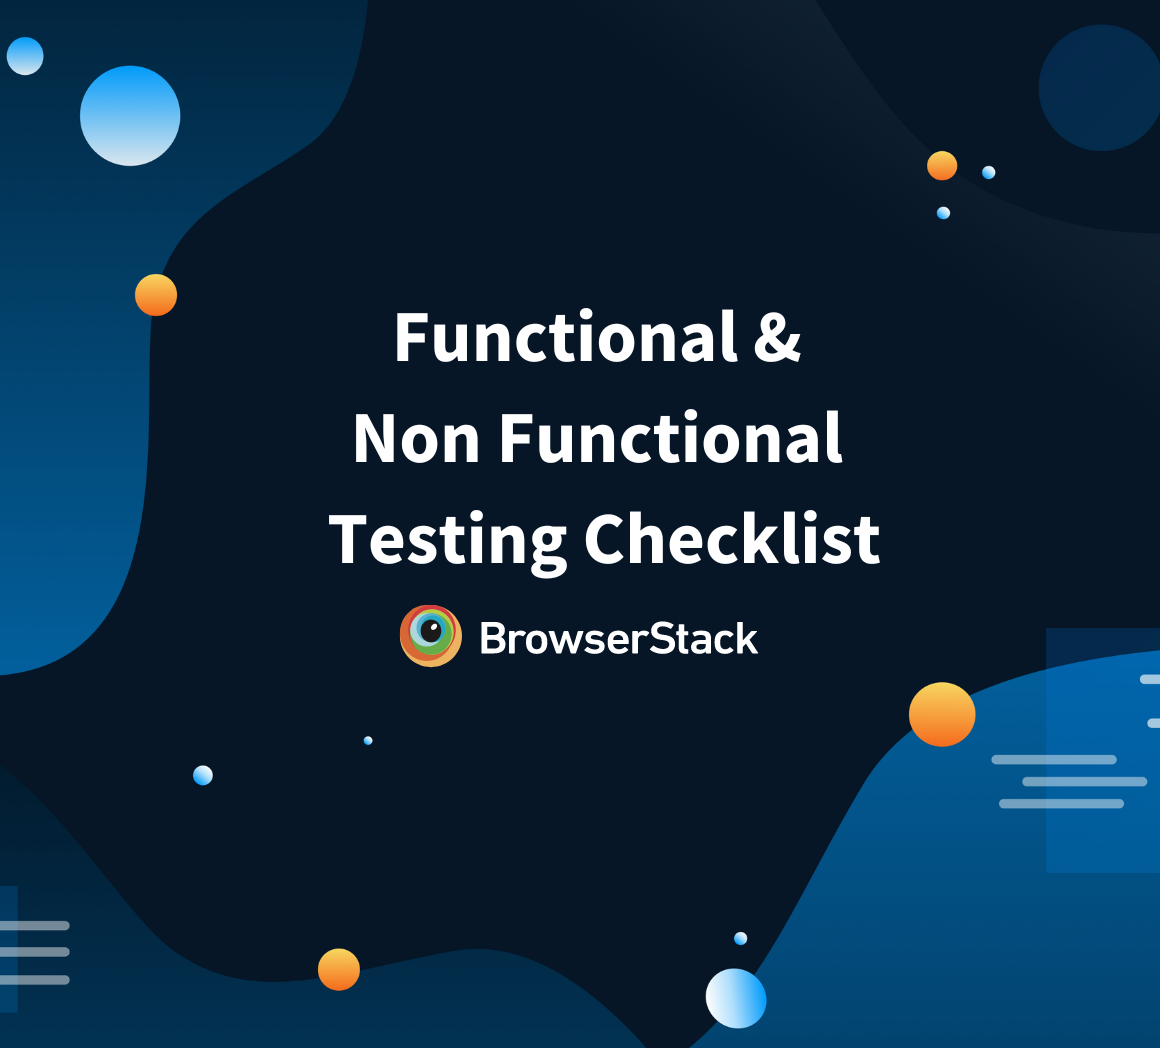 Functional & Non-Functional Testing Checklist